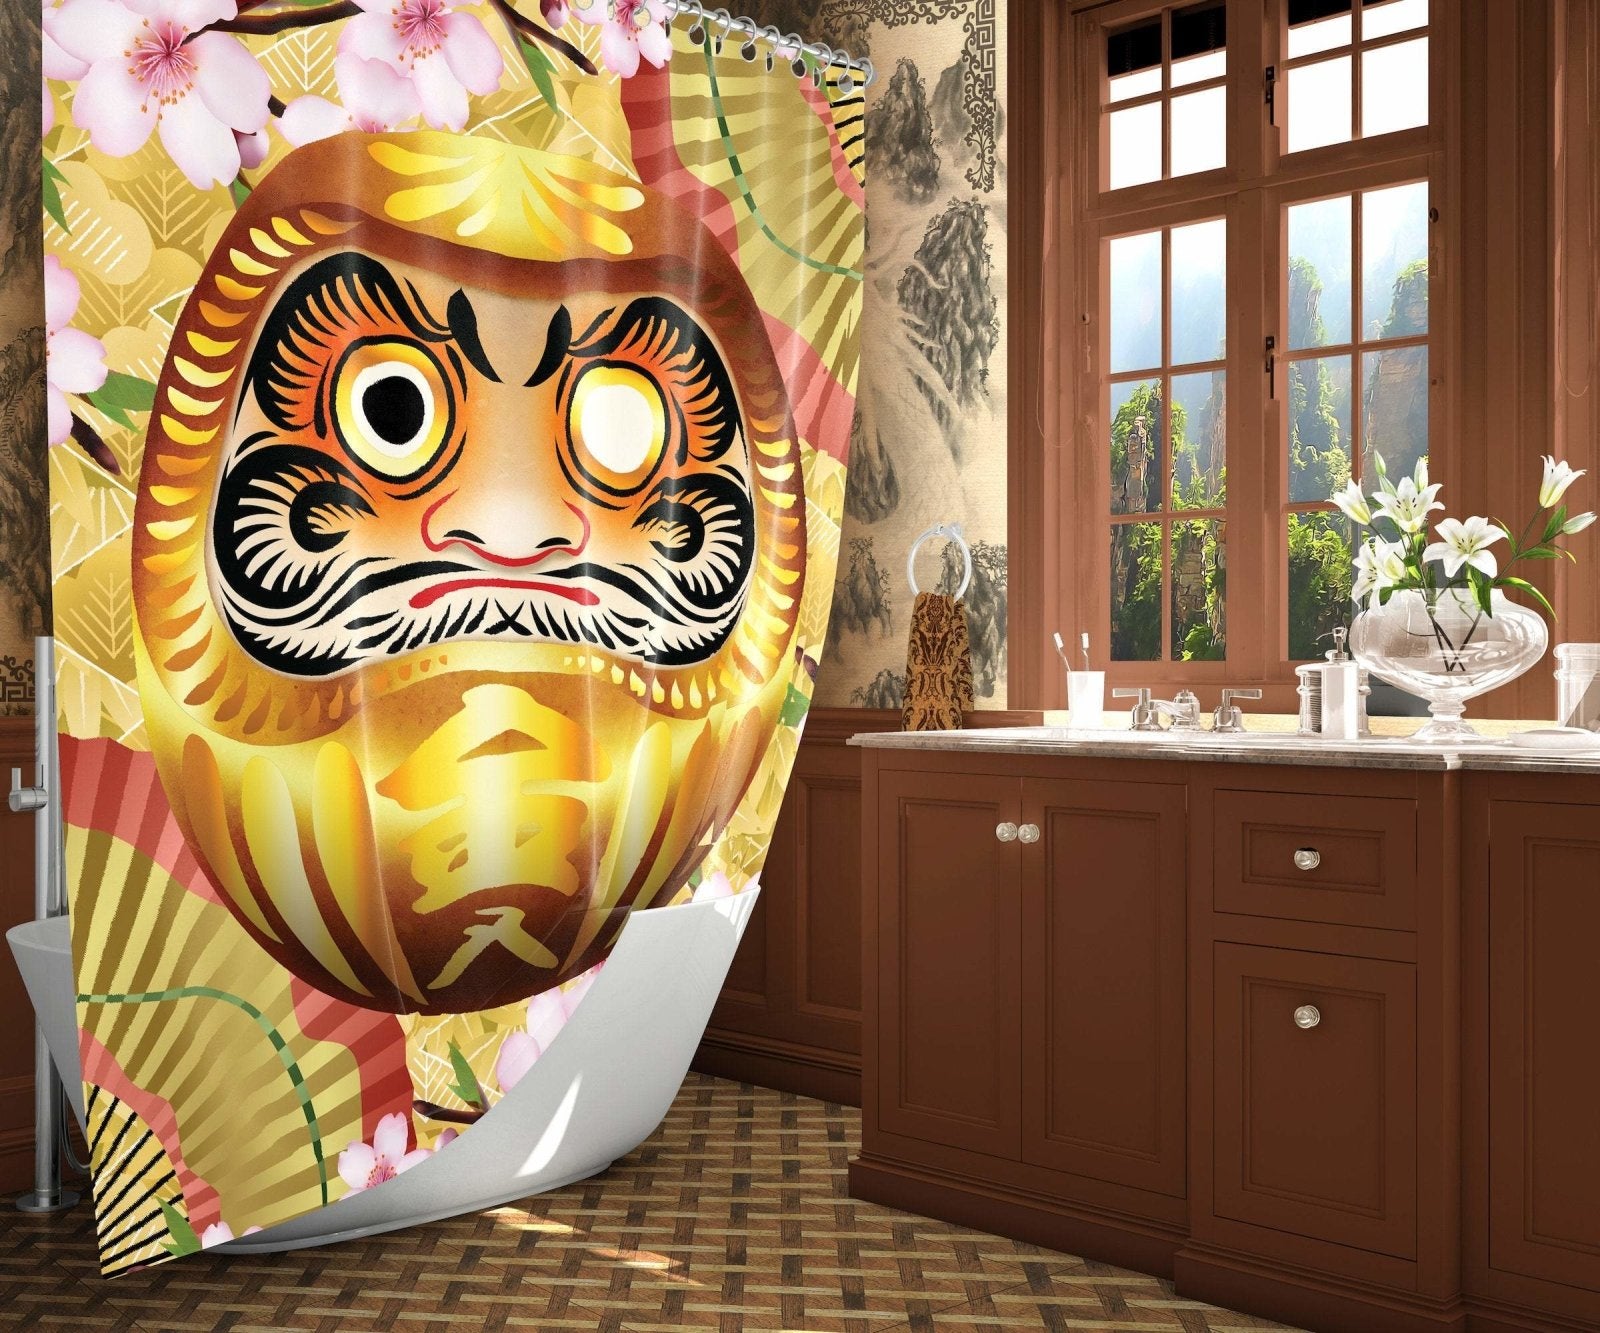 Daruma Shower Curtain, Japanese Bathroom Decor, Eclectic and Funky Home - Gold - Abysm Internal